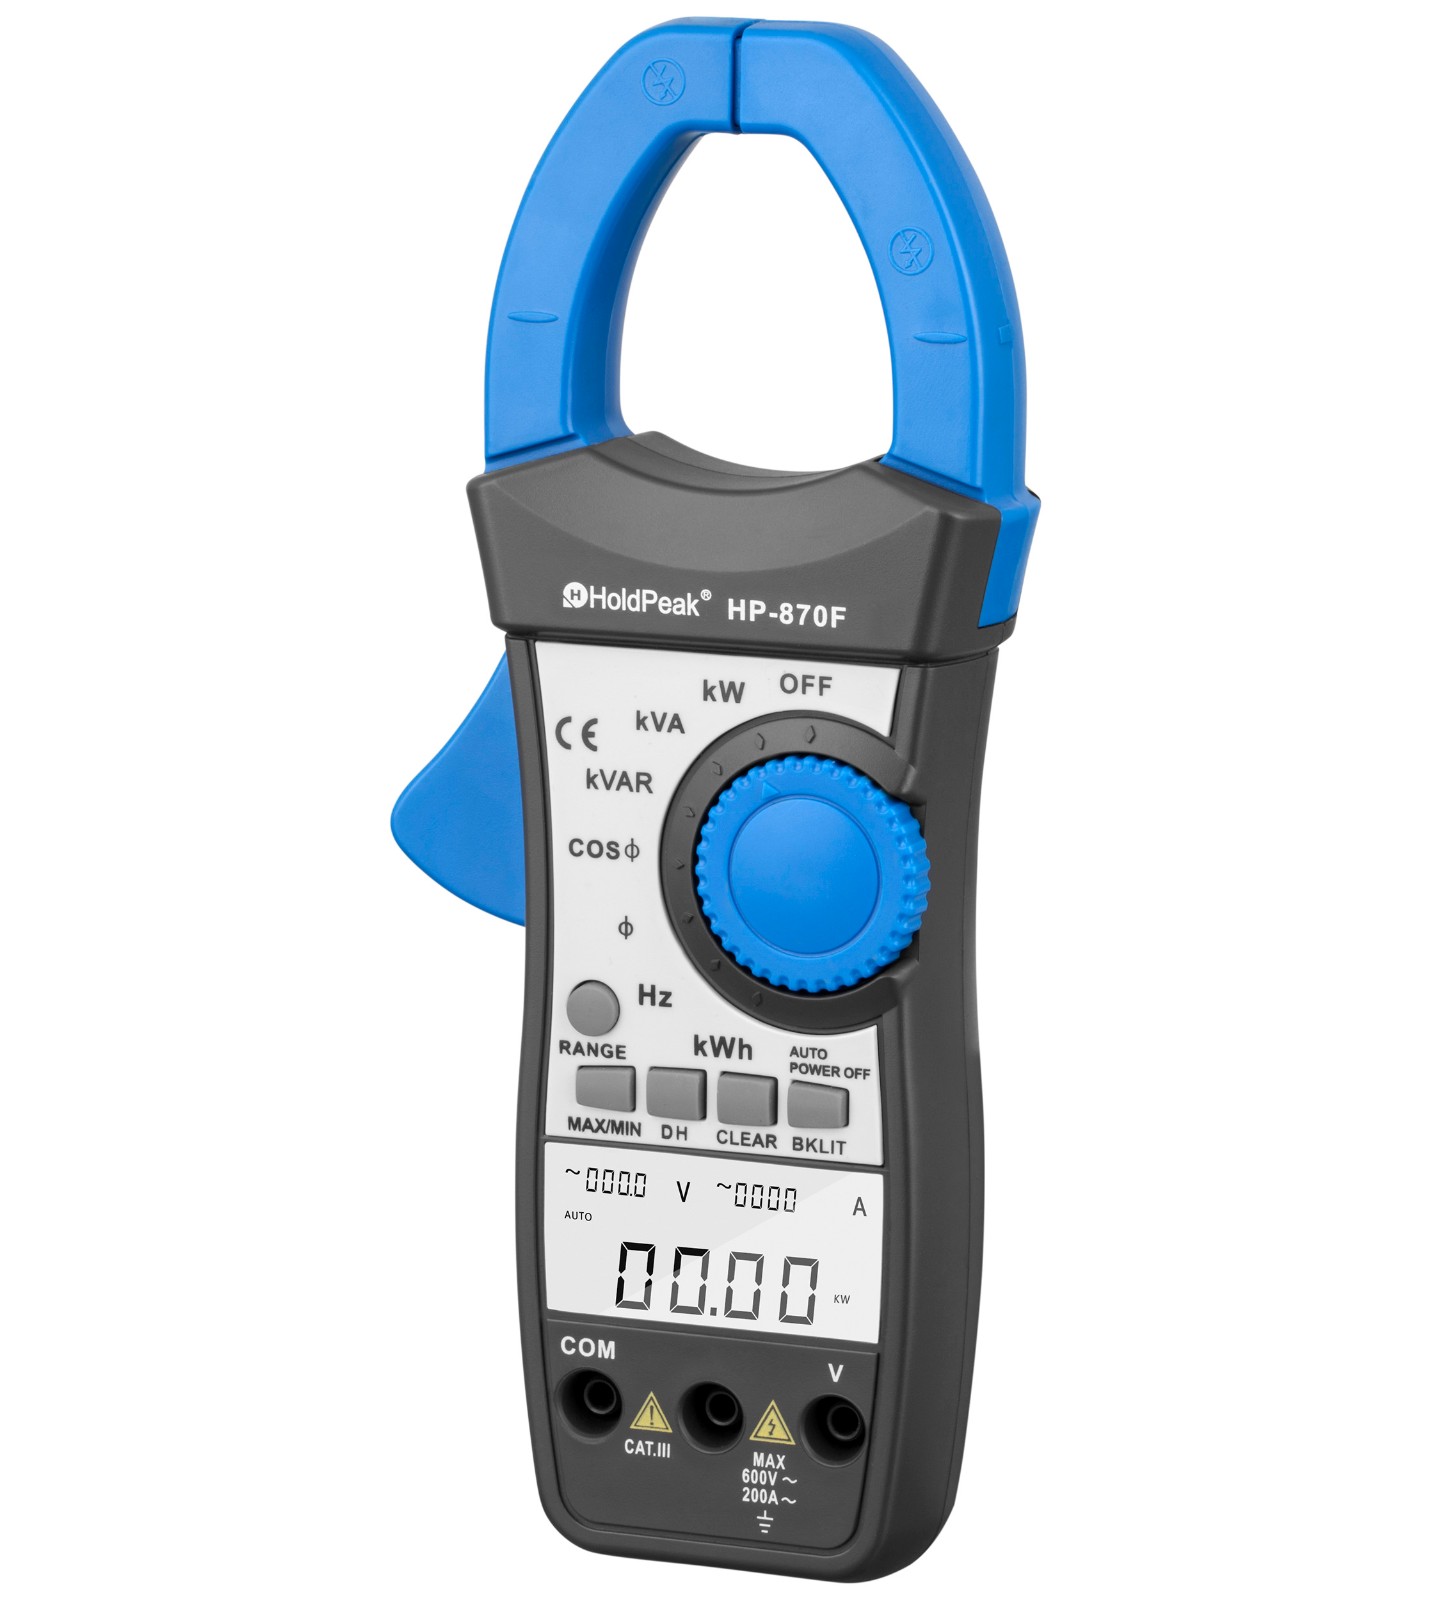 HoldPeak fashion design 600 amp clamp meter Suppliers for petroleum refining industry